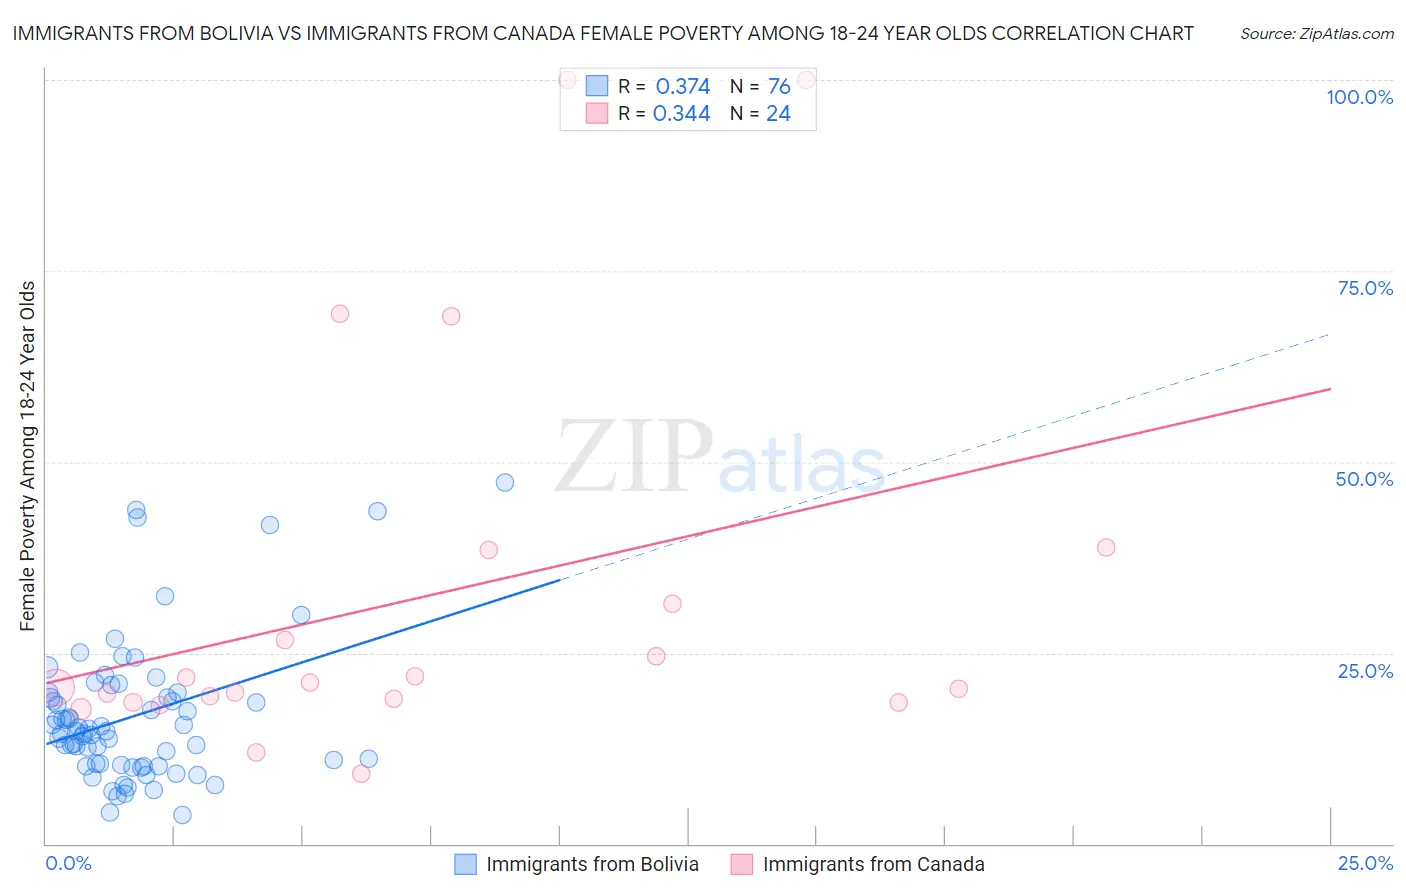 Immigrants from Bolivia vs Immigrants from Canada Female Poverty Among 18-24 Year Olds